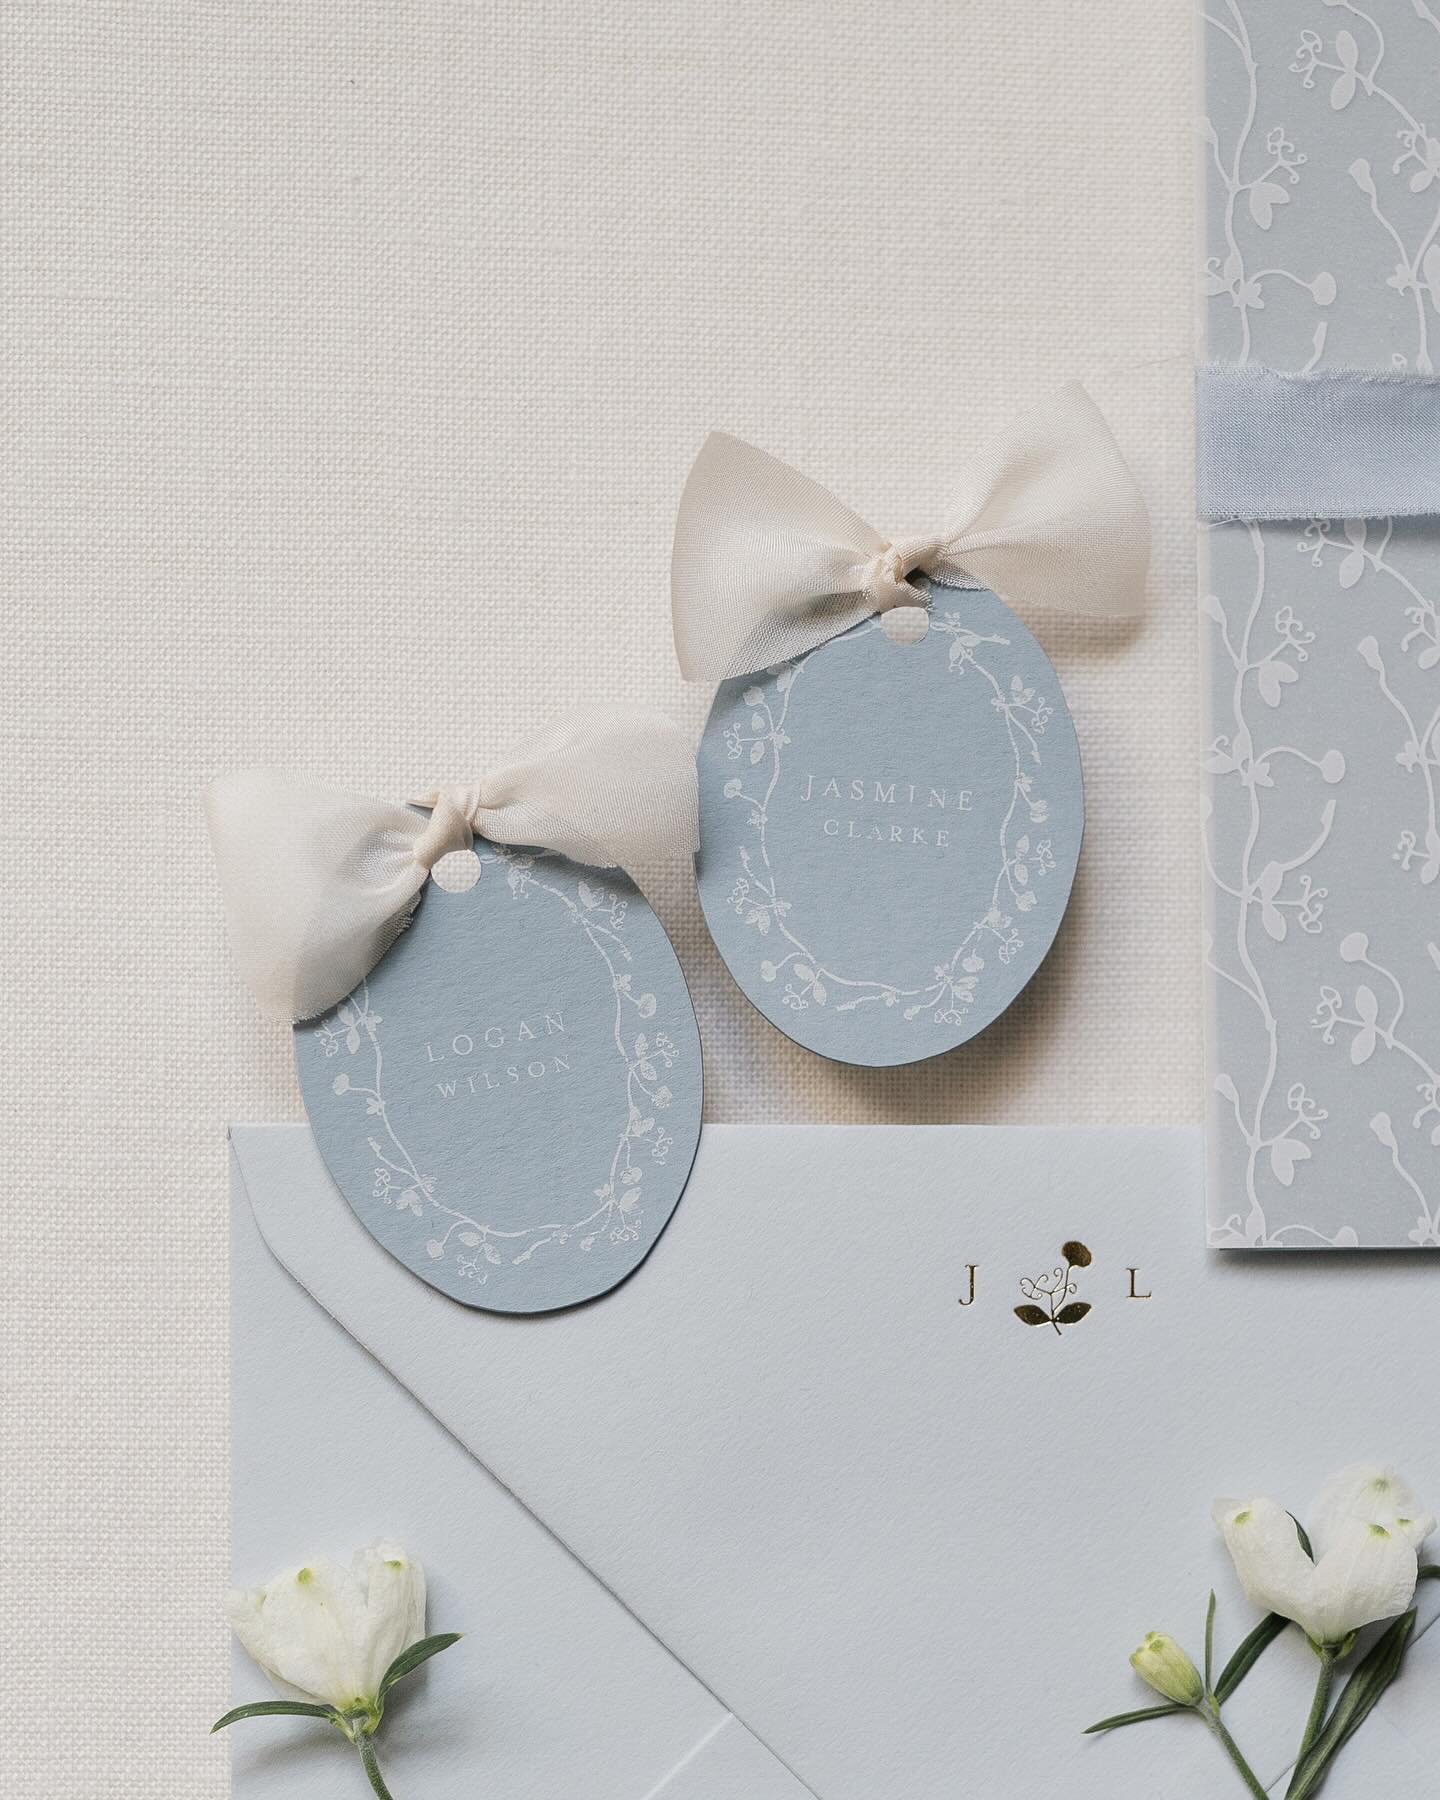 I&rsquo;m LOVING blue tones at the moment. They&rsquo;re just so beautiful paired with neutrals and golds 💙✨

If blues tickle your fancy too, the Frances collection can be customised to a blue palette for your own wedding stationery. Visit my websit